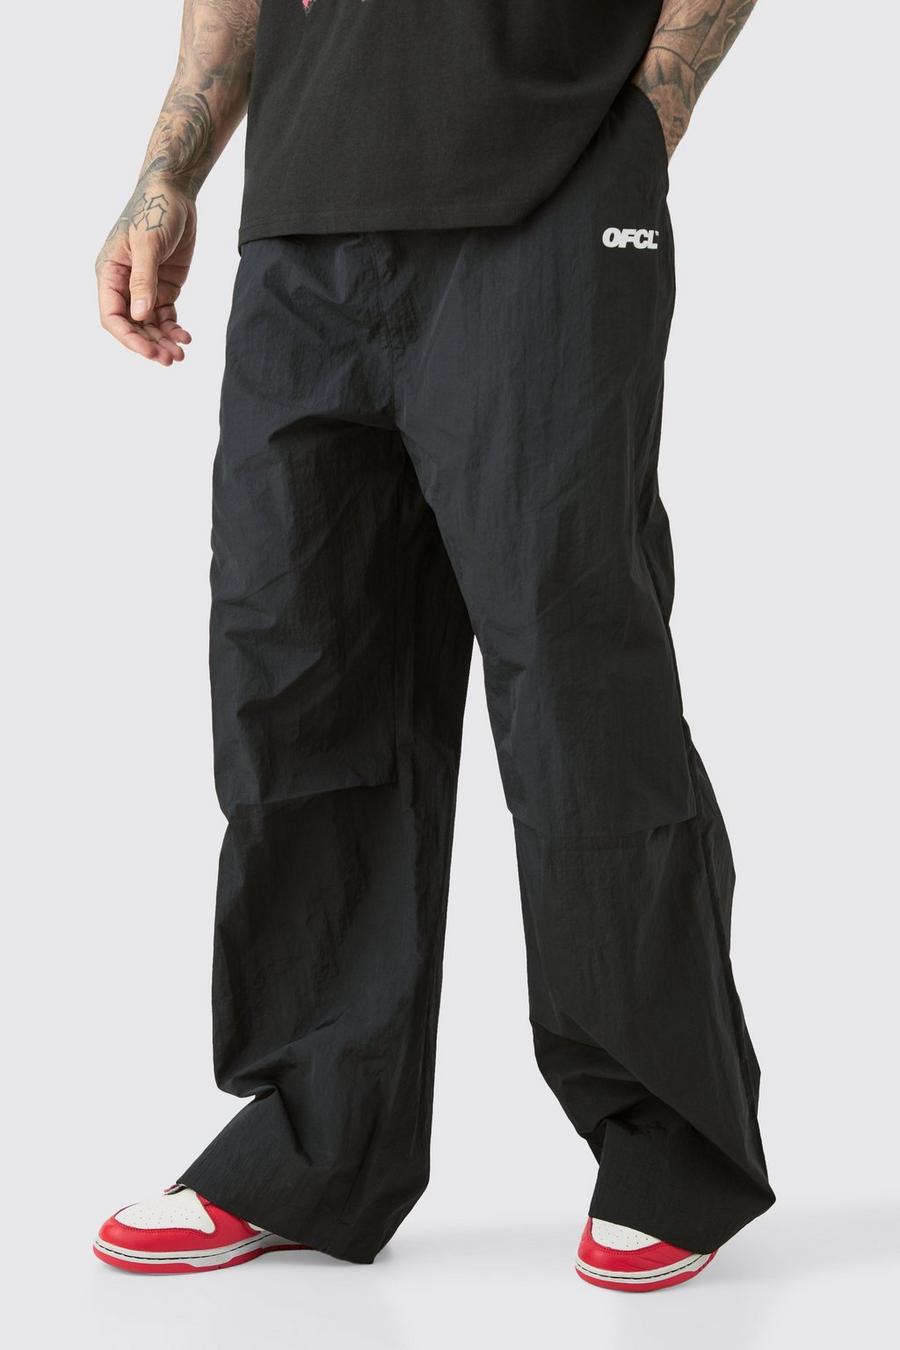 Tall Oversize Official Hose, Black